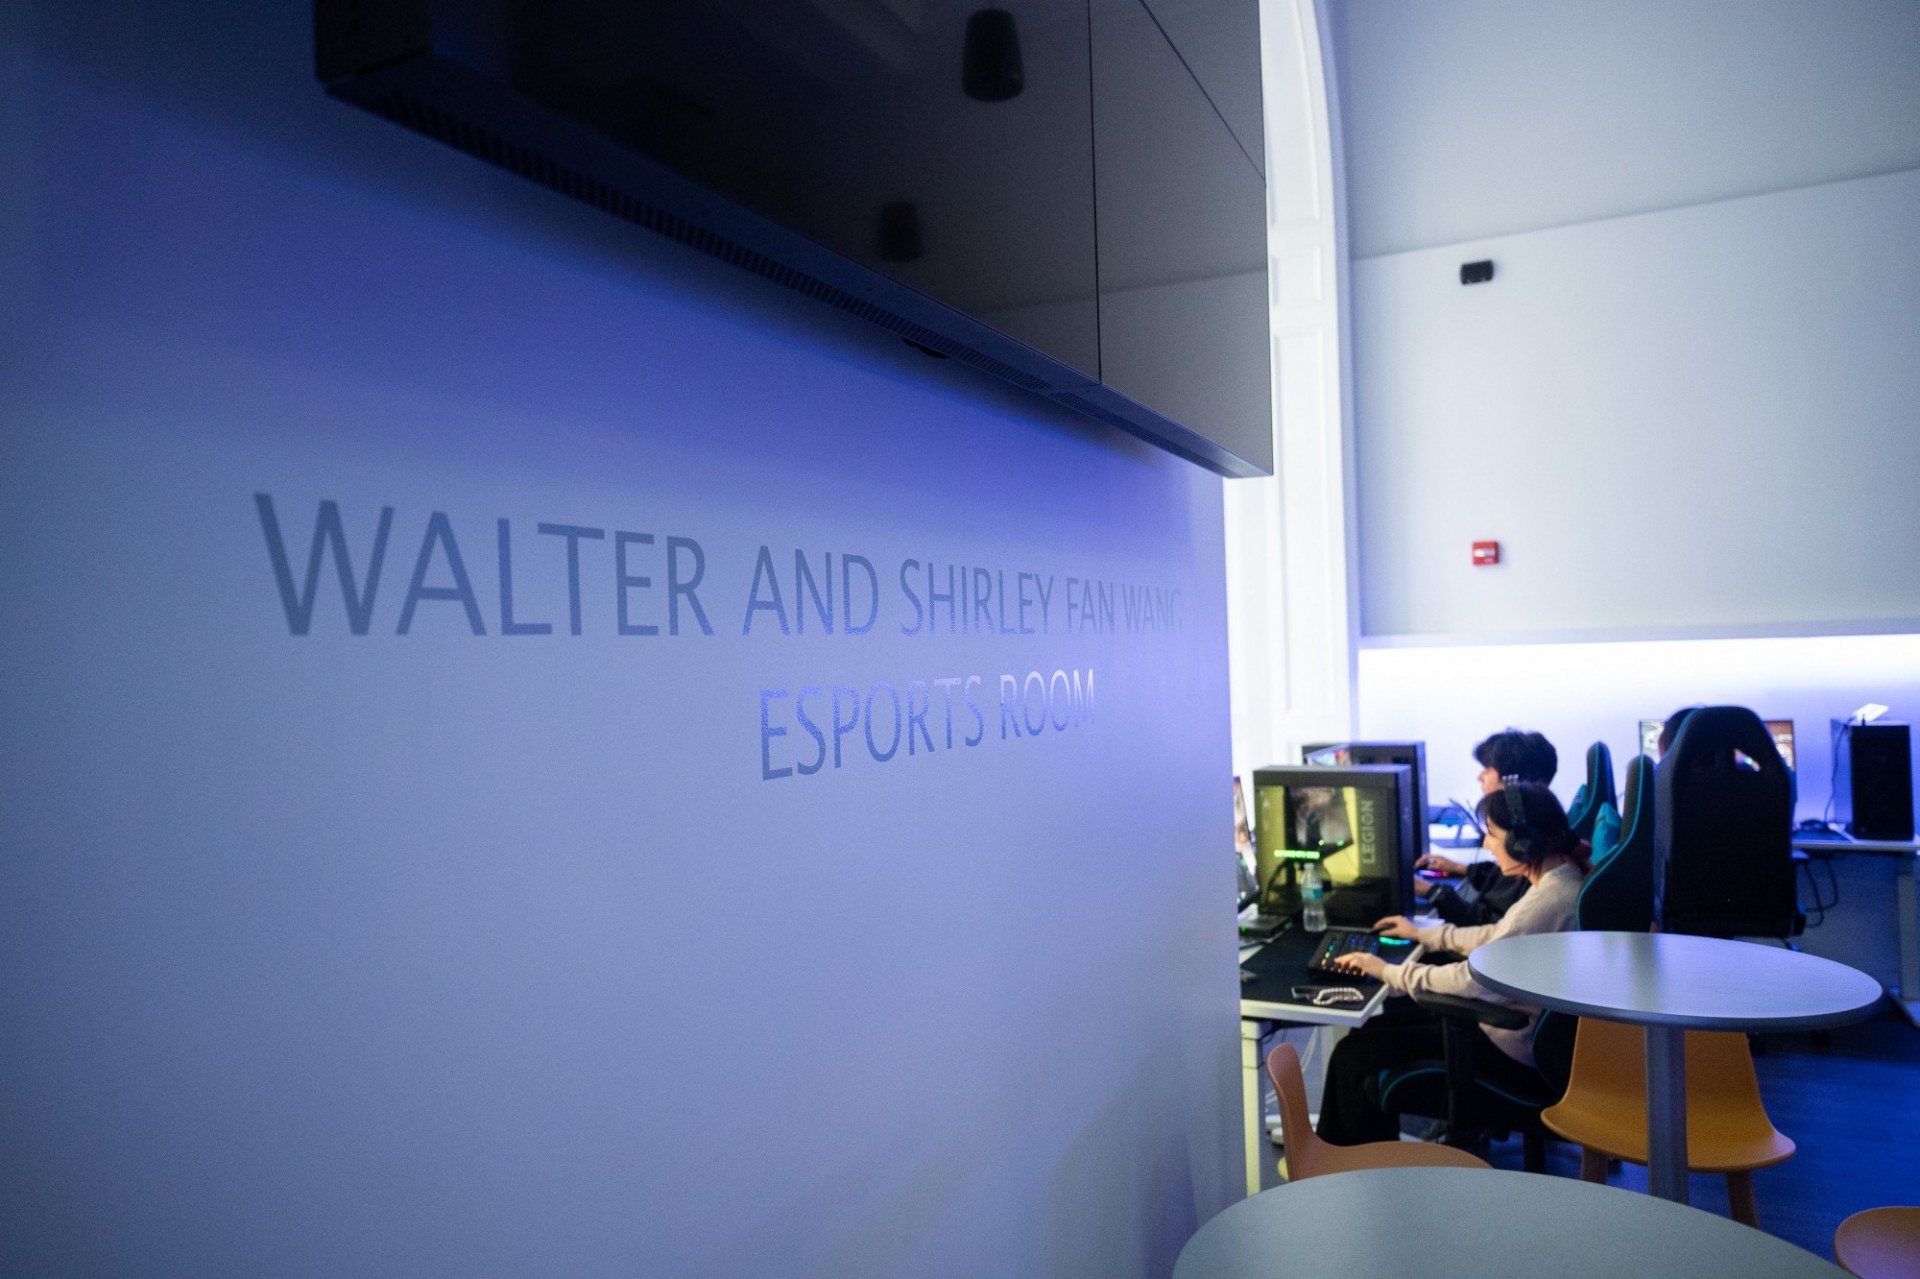 A side shot of the Wallach Esports Lounge, with a TV on the wall about signage, and students sitting at computers playing games.